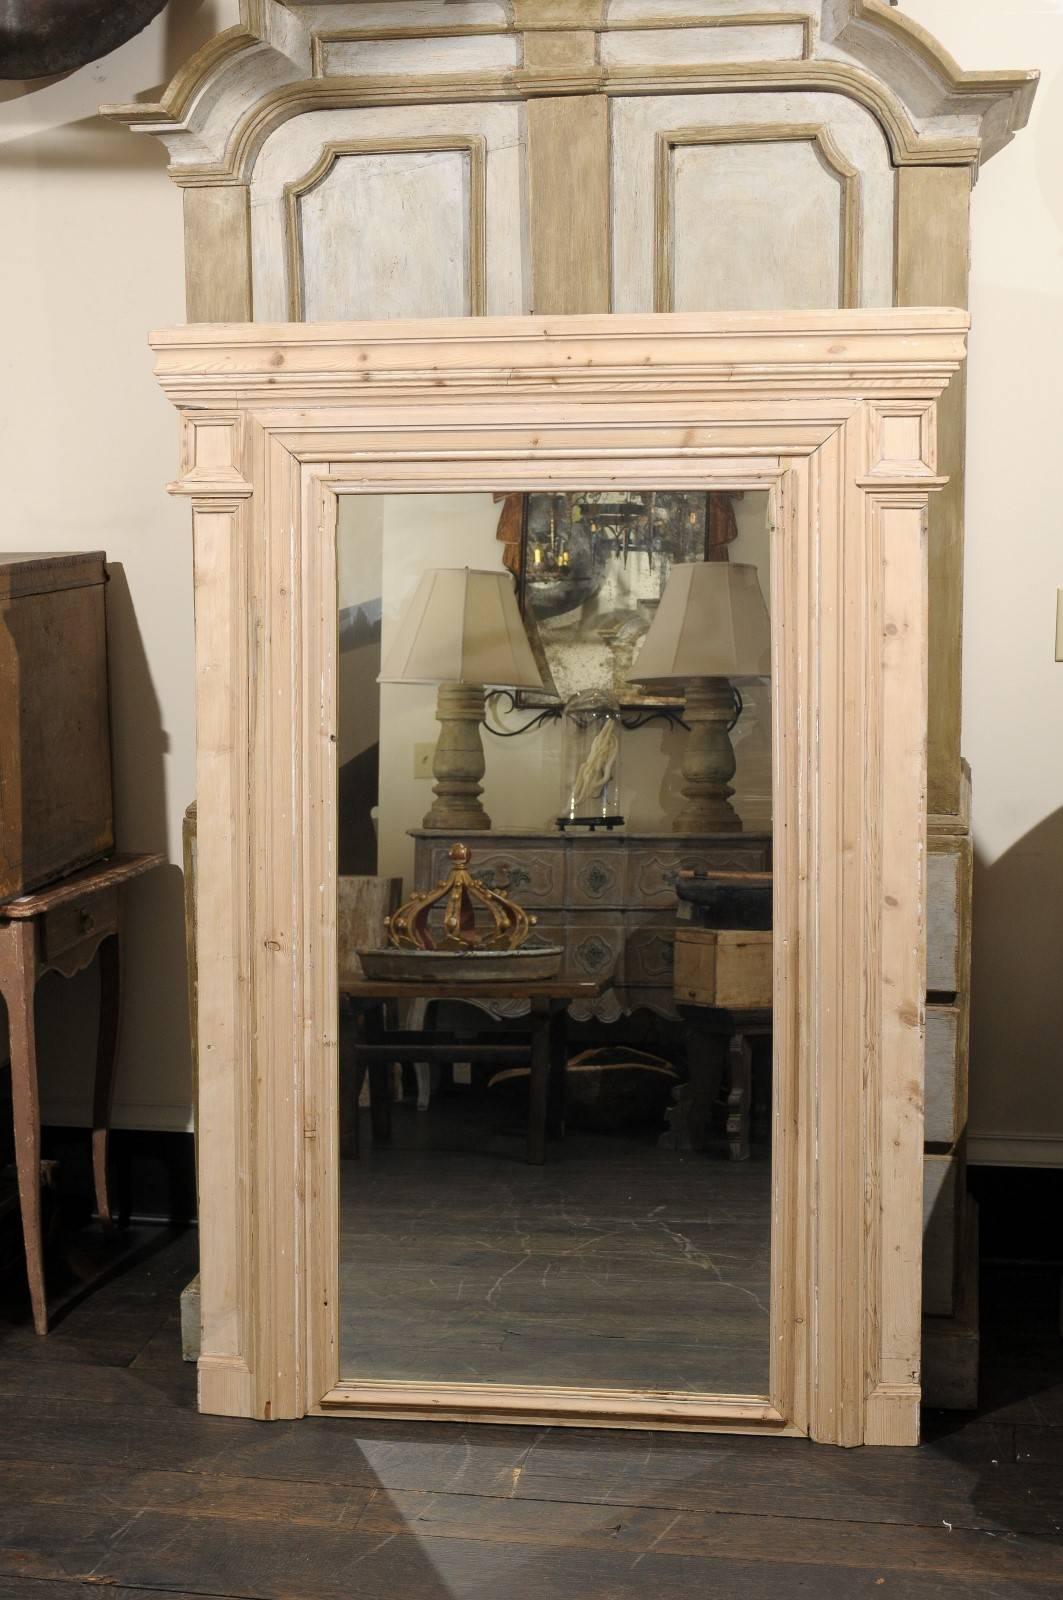 A French 19th century trumeau mirror with clean simple lines. This large French mirror features a natural wood finish with nice, visible wood grain throughout. This mirror has a very simple yet elegant look with its two nicely carved rectangles at